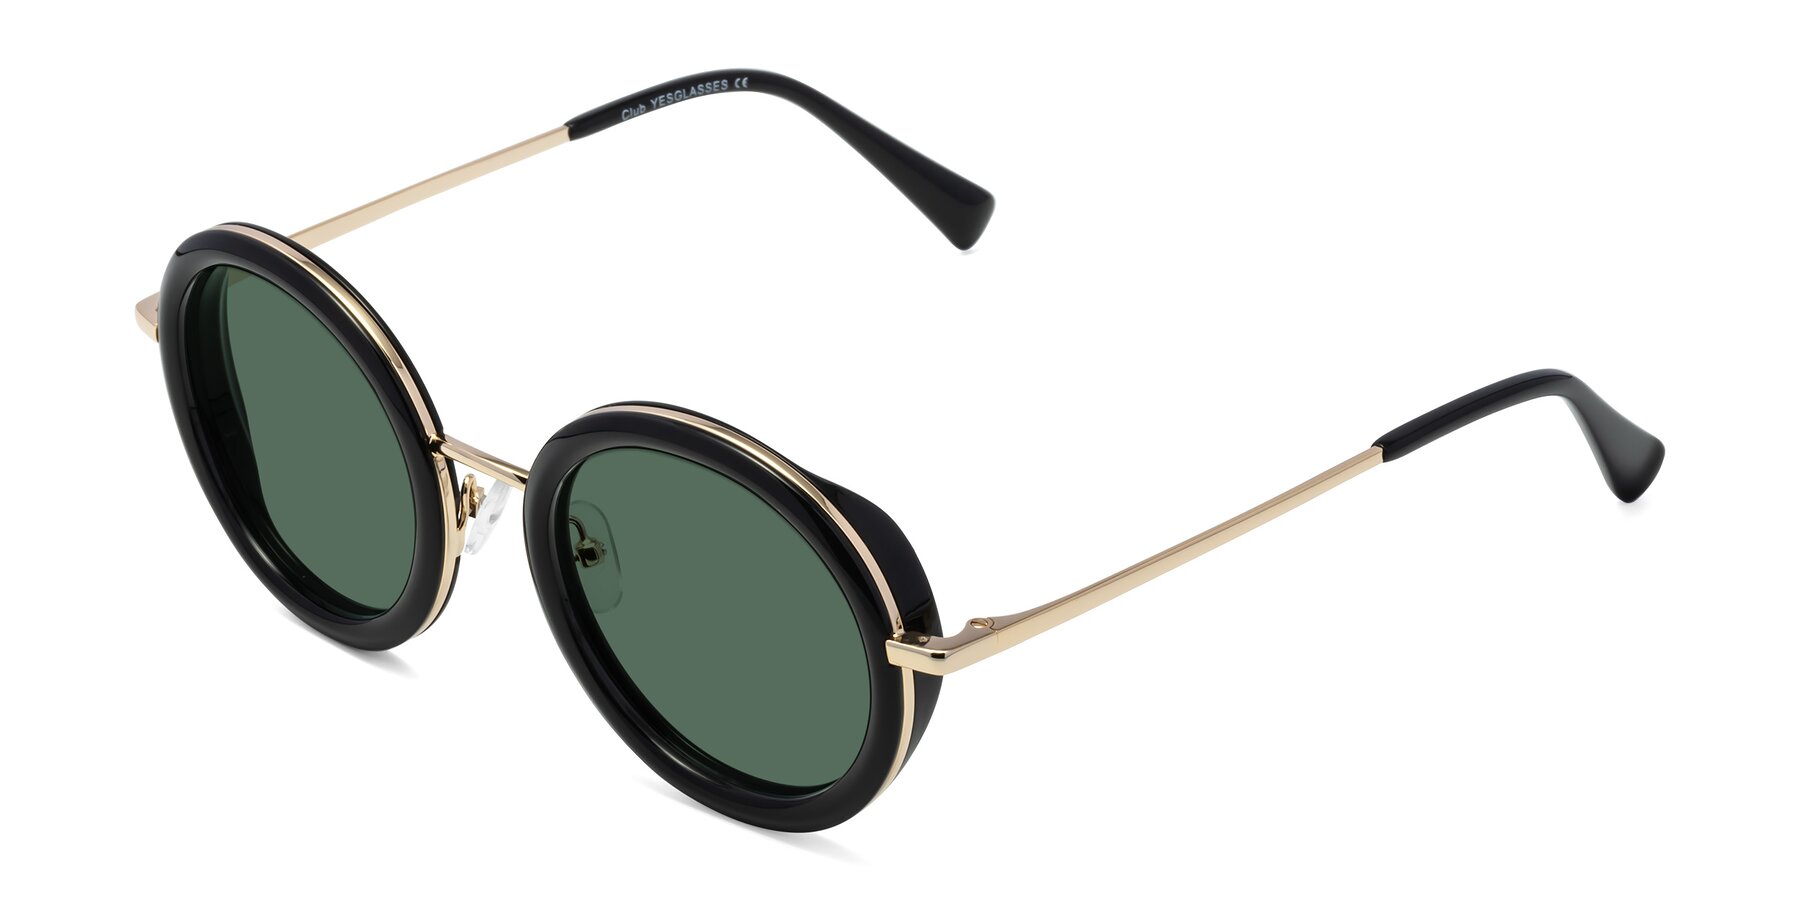 Angle of Club in Black-Gold with Green Polarized Lenses